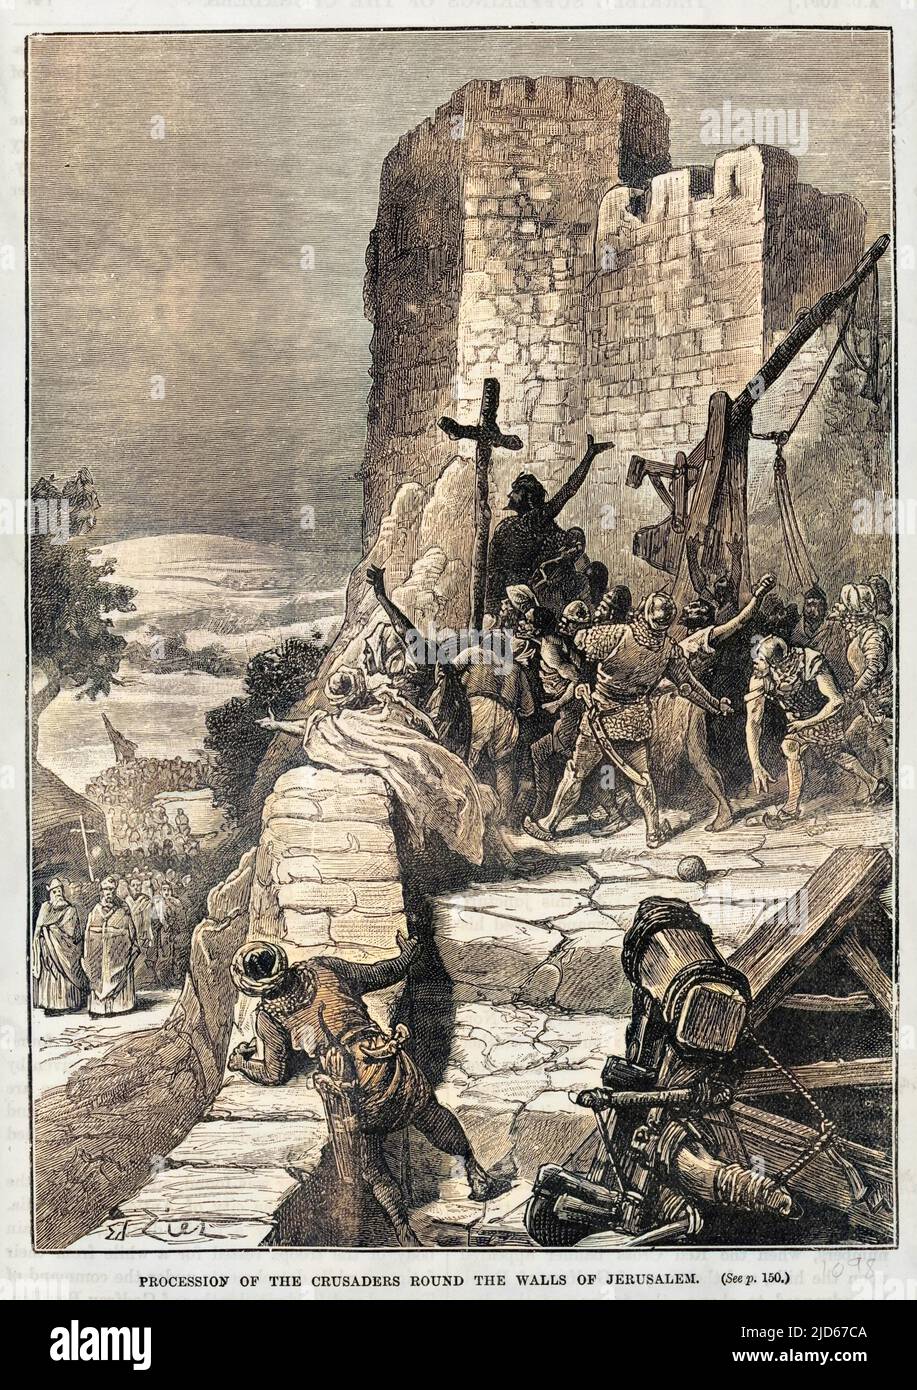 FIRST CRUSADE The victorious Crusaders process round Jerusalem, after massacring the defenders till the streets were filled with corpses Colourised version of : 10016232       Date: July 1099 Stock Photo